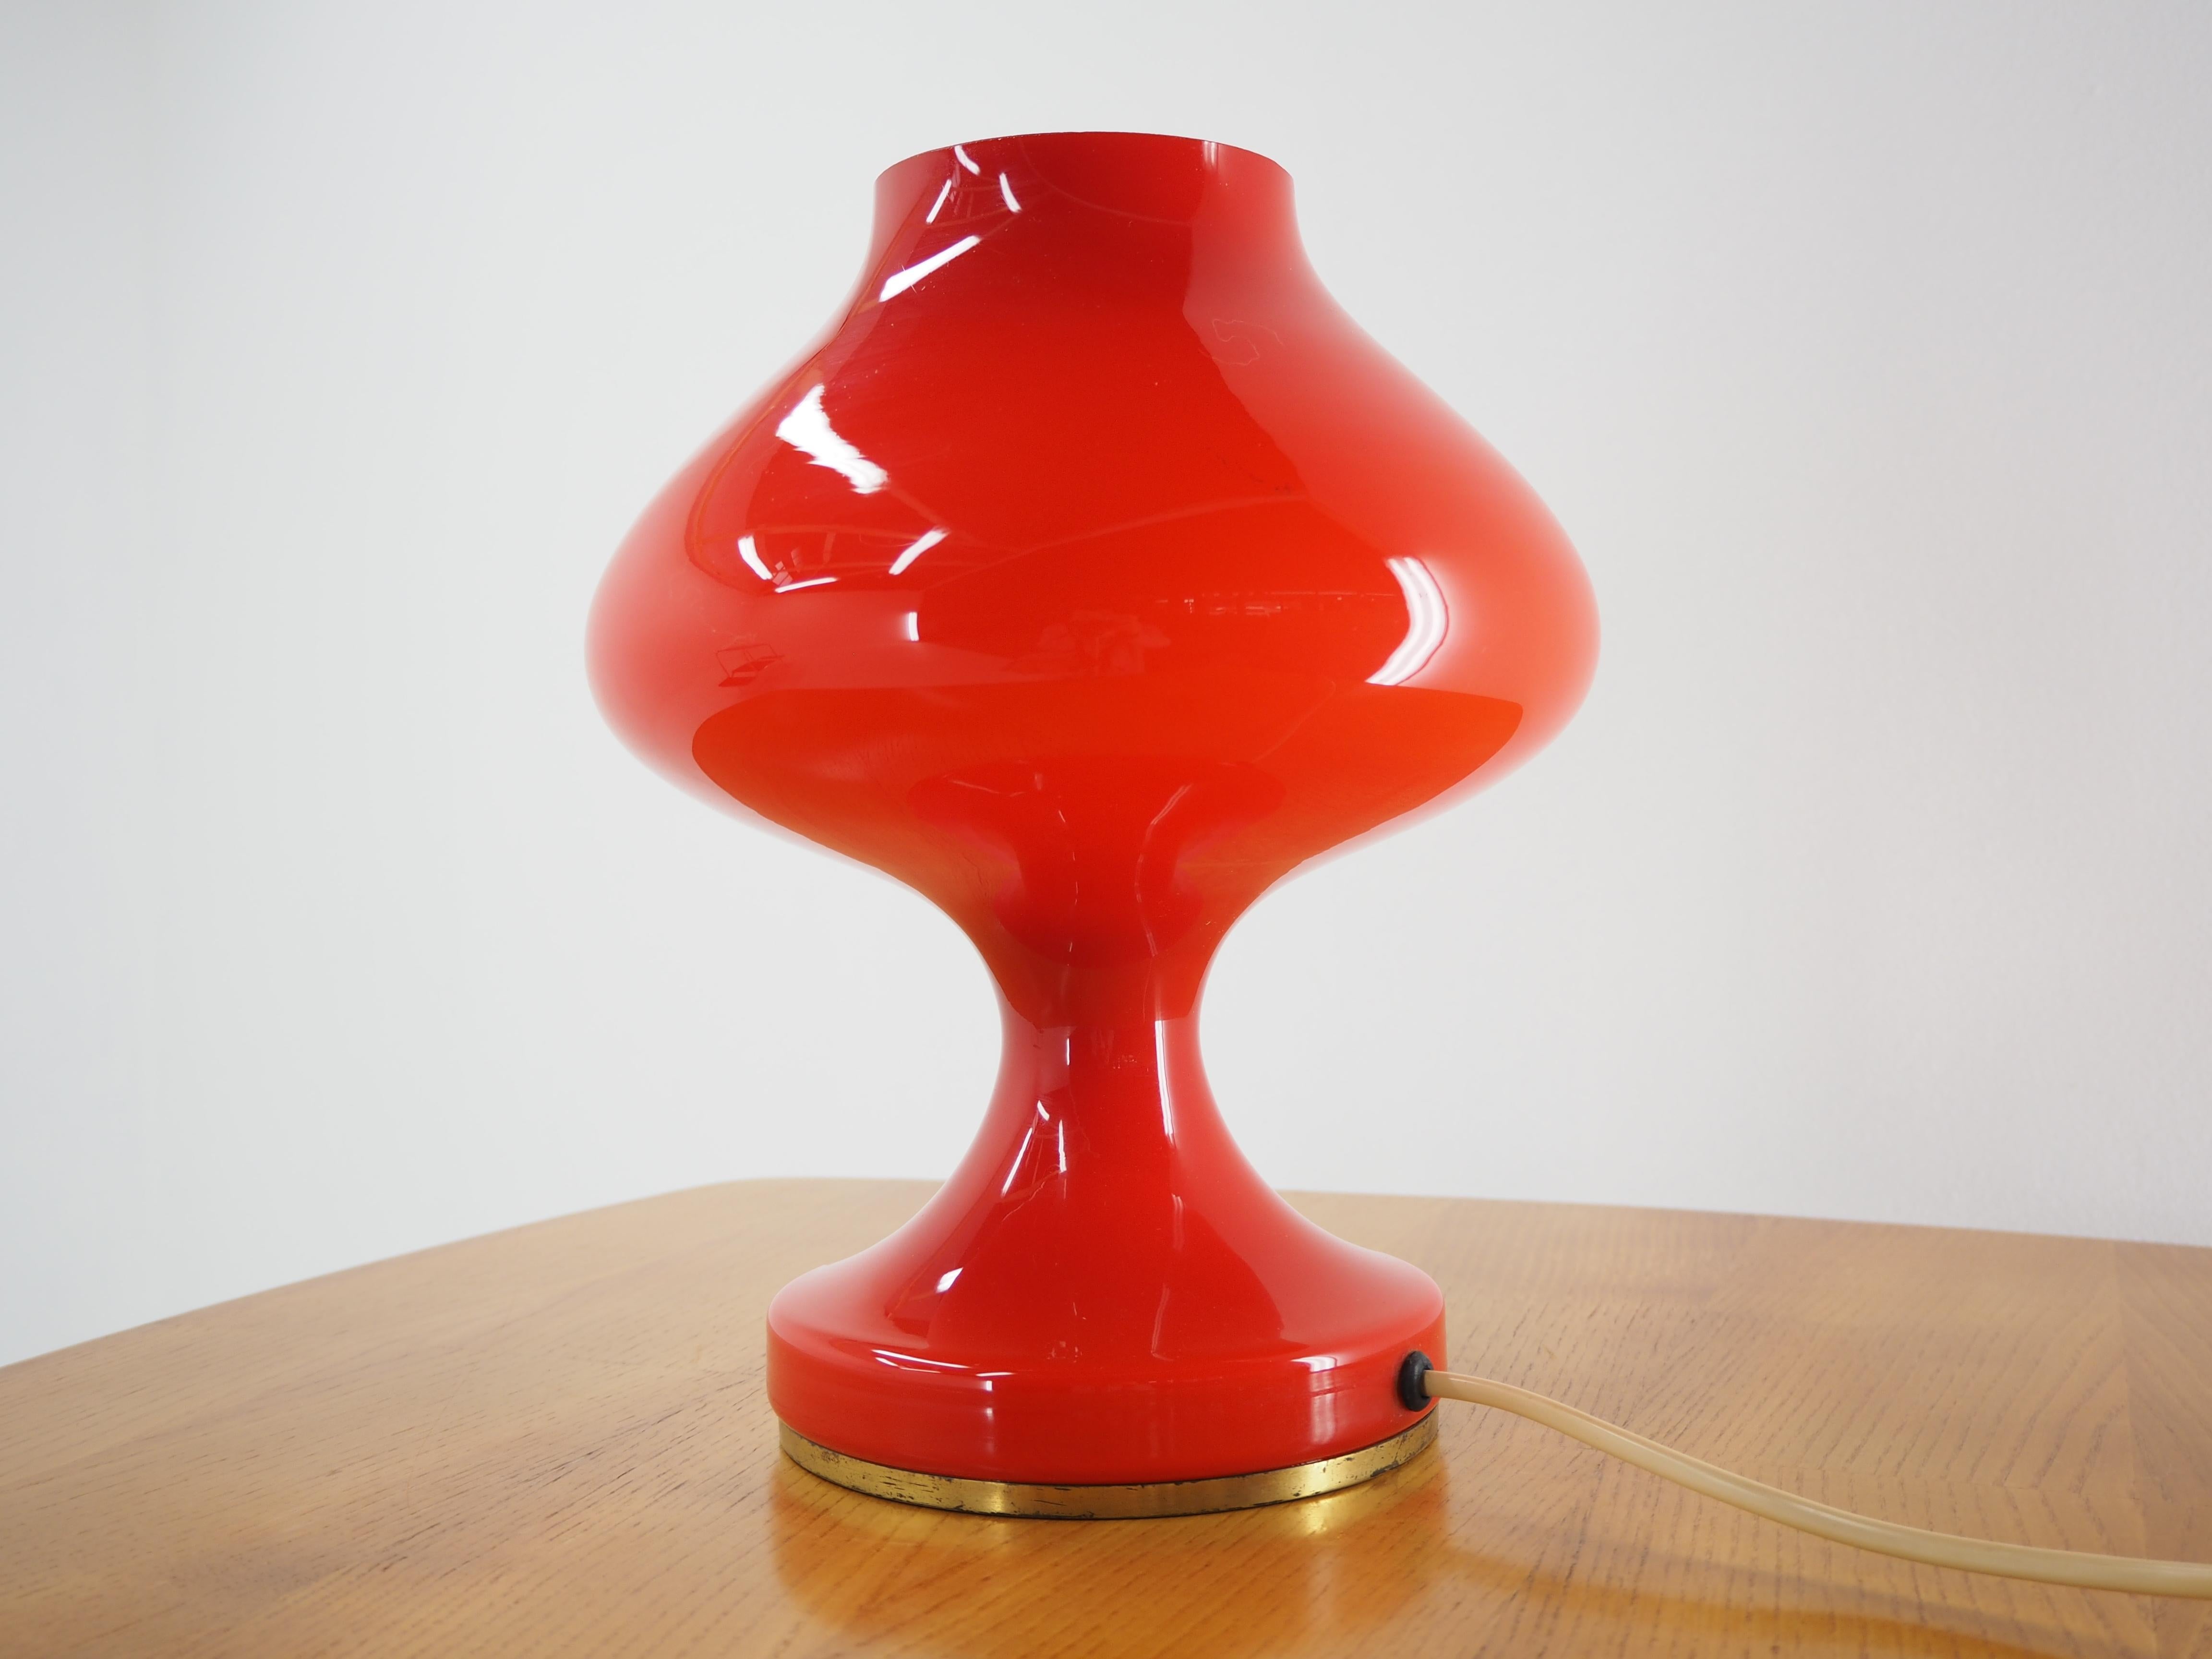 Czech Midcentury Red All Glass Table Lamp by Stefan Tabery for OPP Jihlava, 1970s